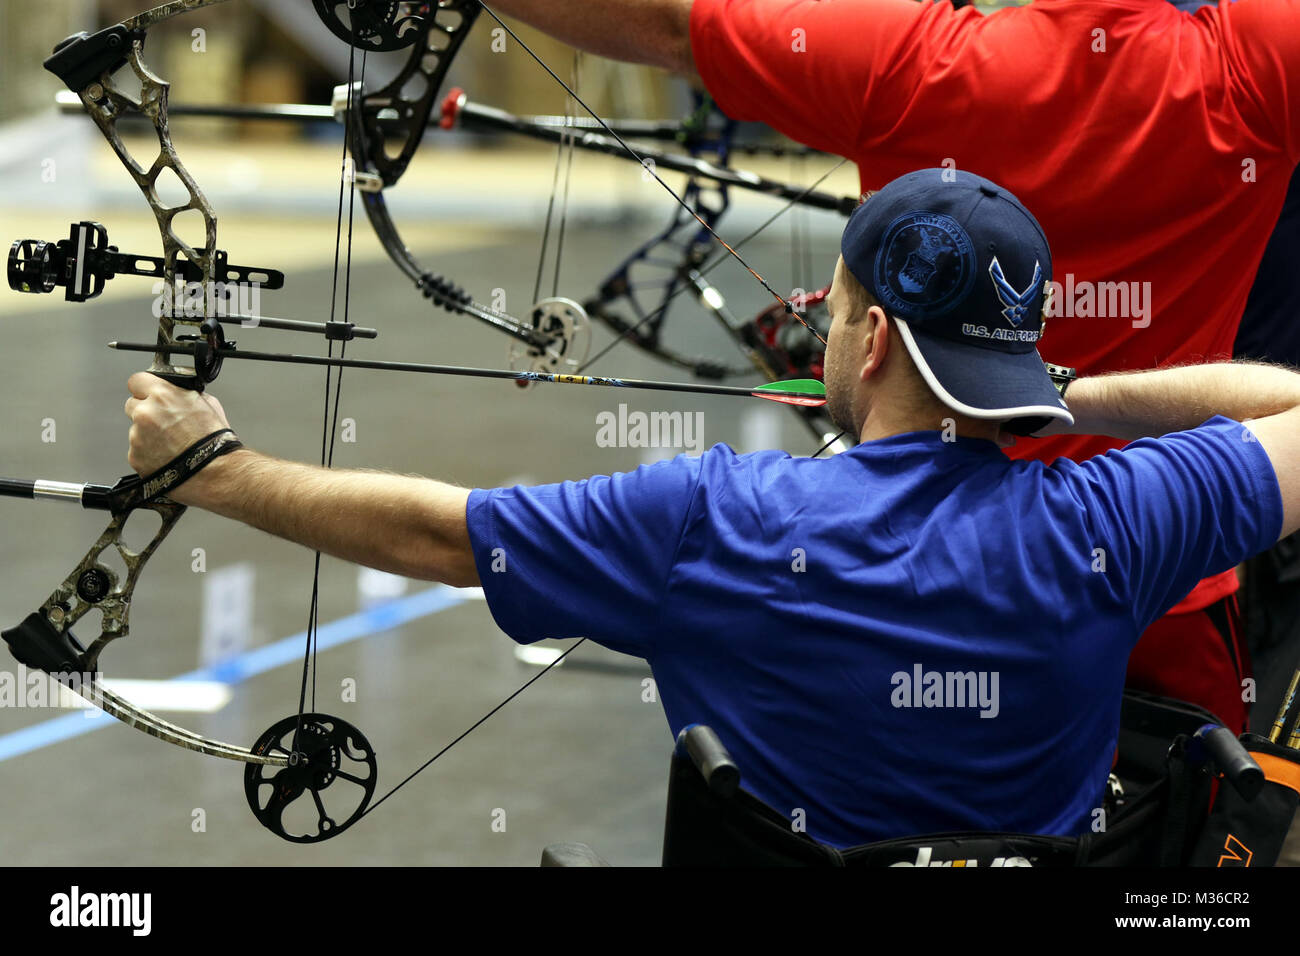 U.S. Air Force Veteran Brian Schaaf, an Oxford, England, native, aims his compound bow at his target during the archery competition at the 2016 DoD Warrior Games at the U.S. Military Academy at West Point, N.Y.  The Warrior Games is a Paralympic-style adaptive sports competition for wounded, ill and injured Service members and veterans. (U.S. Army photo by Sgt. Joshua Brownlee/Released) 160617-A-RS871-630 by Air Force Wounded Warrior Stock Photo